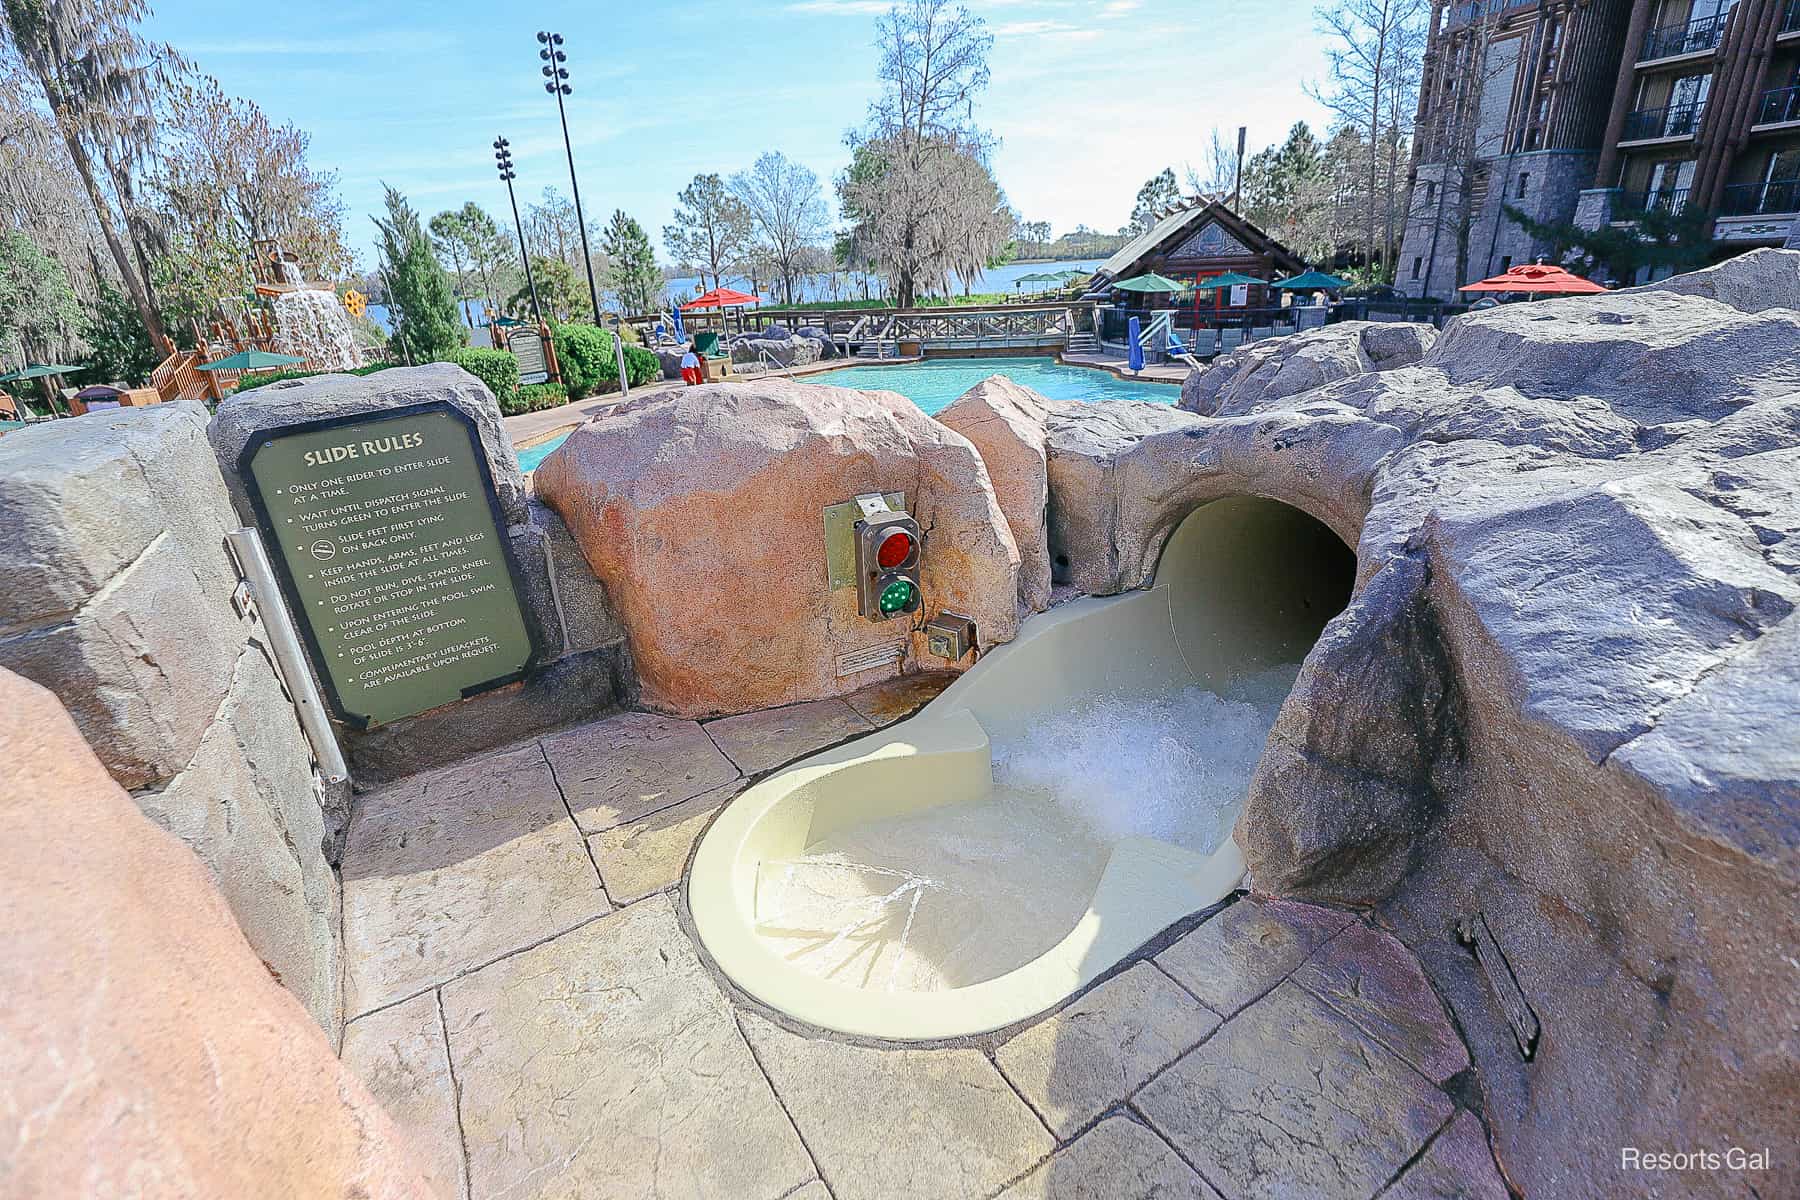 the entrance to the water slide with red and green traffic signals 